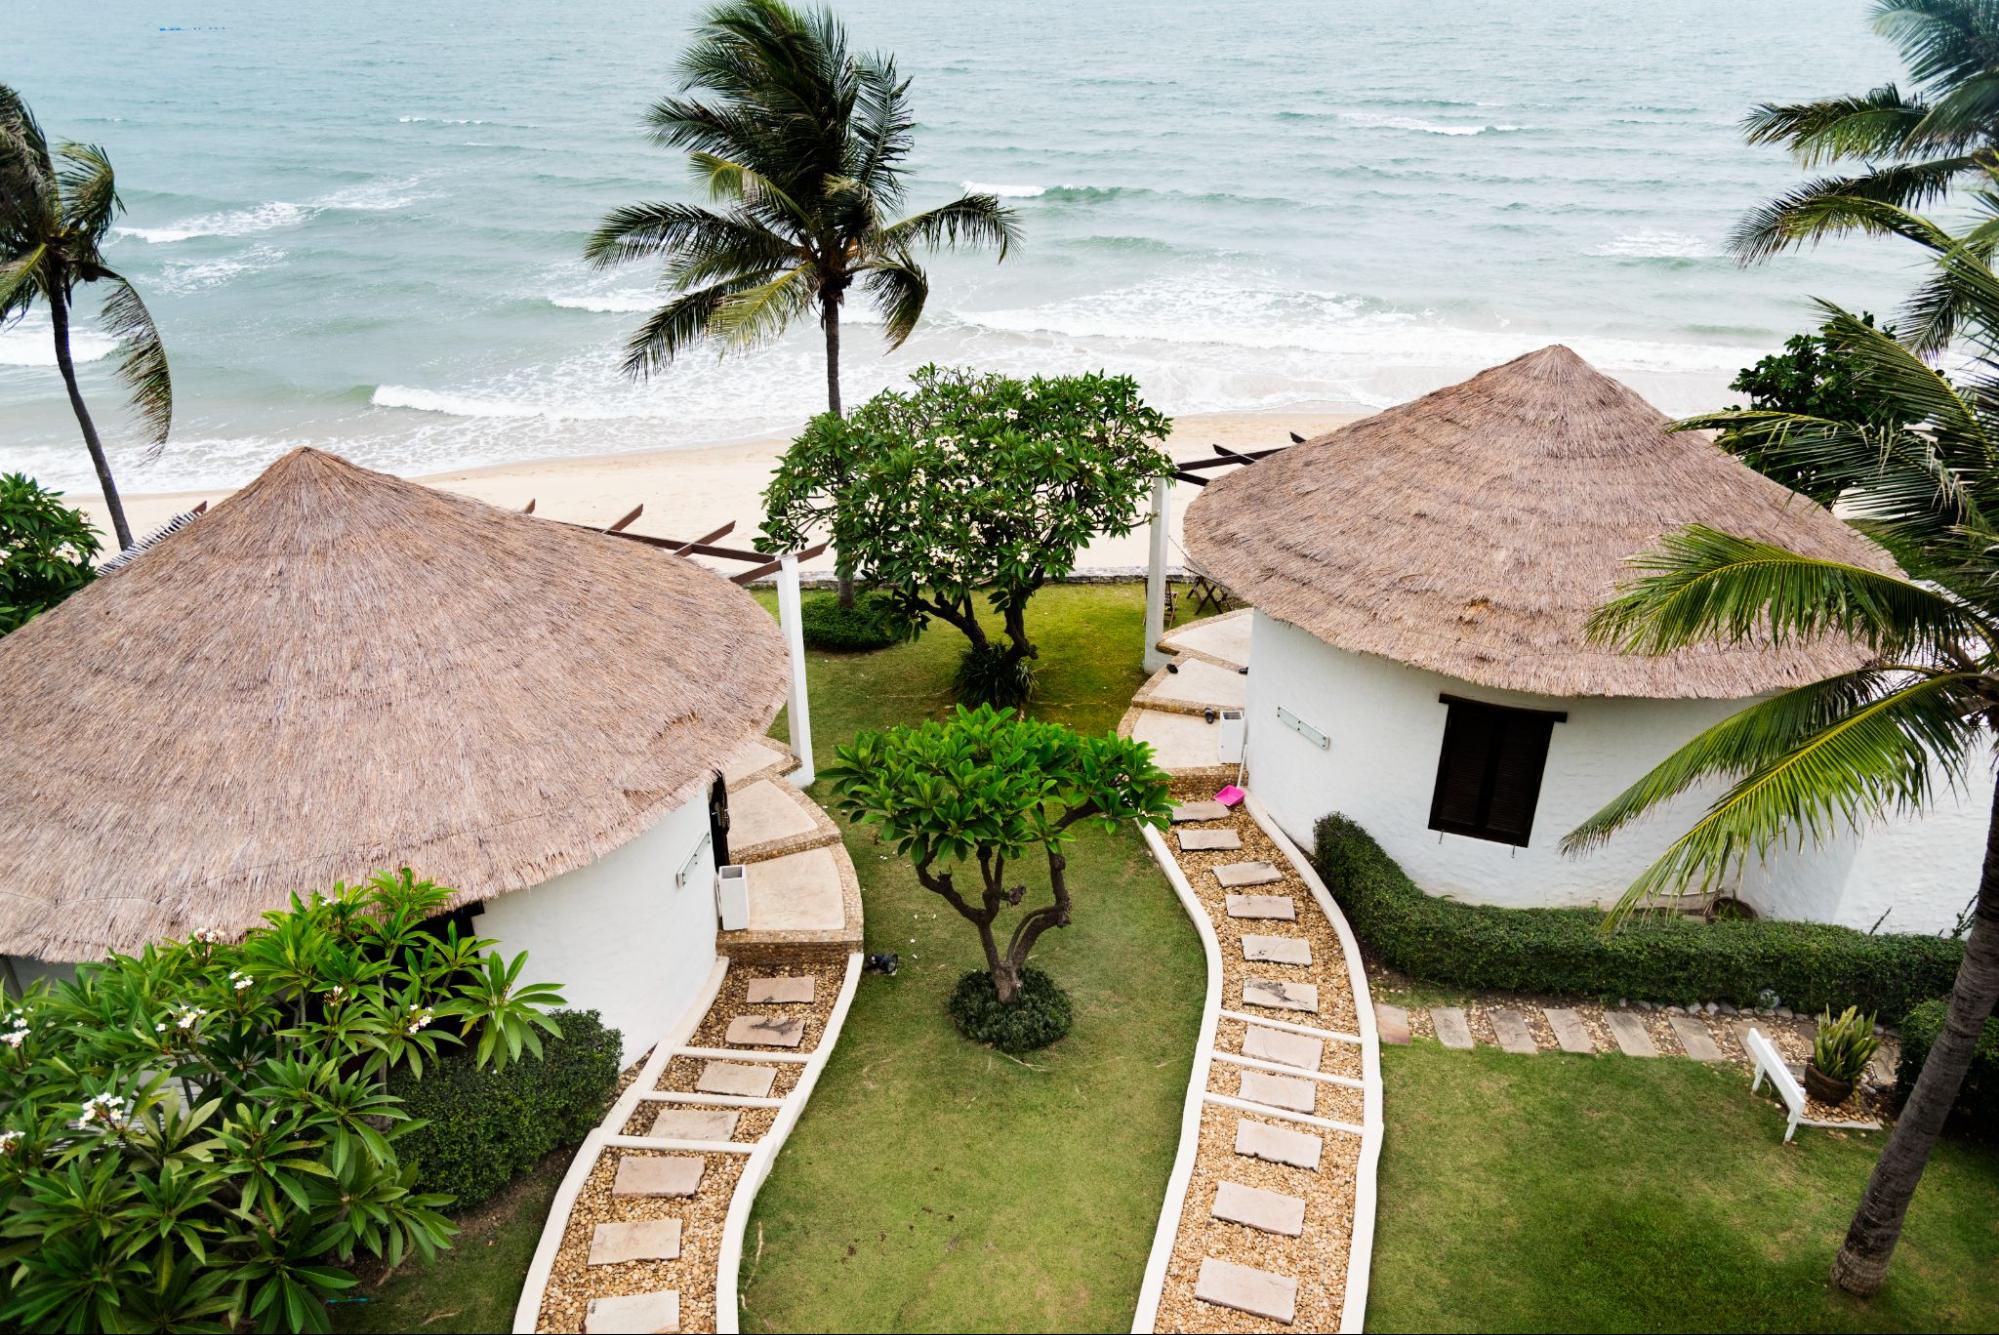 An aerial view of two white bungalows in a beautifully landscaped luxury resort facing the beach. The pristine setting includes lush greenery and well-maintained grounds.

An aerial view of two white bungalows in a beautifully landscaped luxury resort facing the beach. The pristine setting includes lush greenery and well-maintained grounds.

